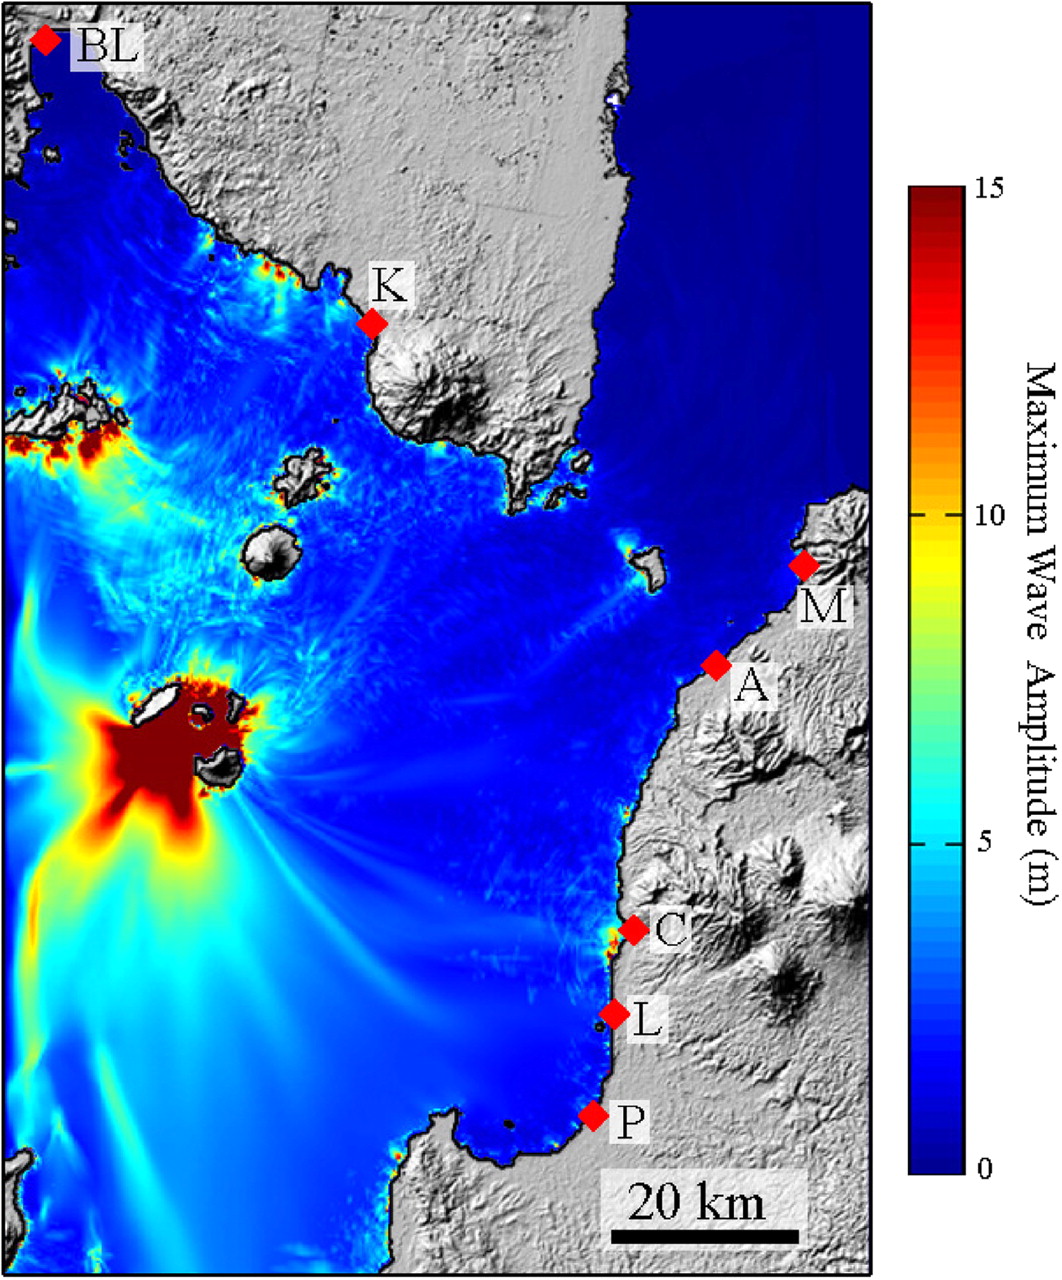 A simulation of an Anak Krakatau volcanic event shows waves of 15 meters or more locally (in red). (Giachetti et al. 2012)